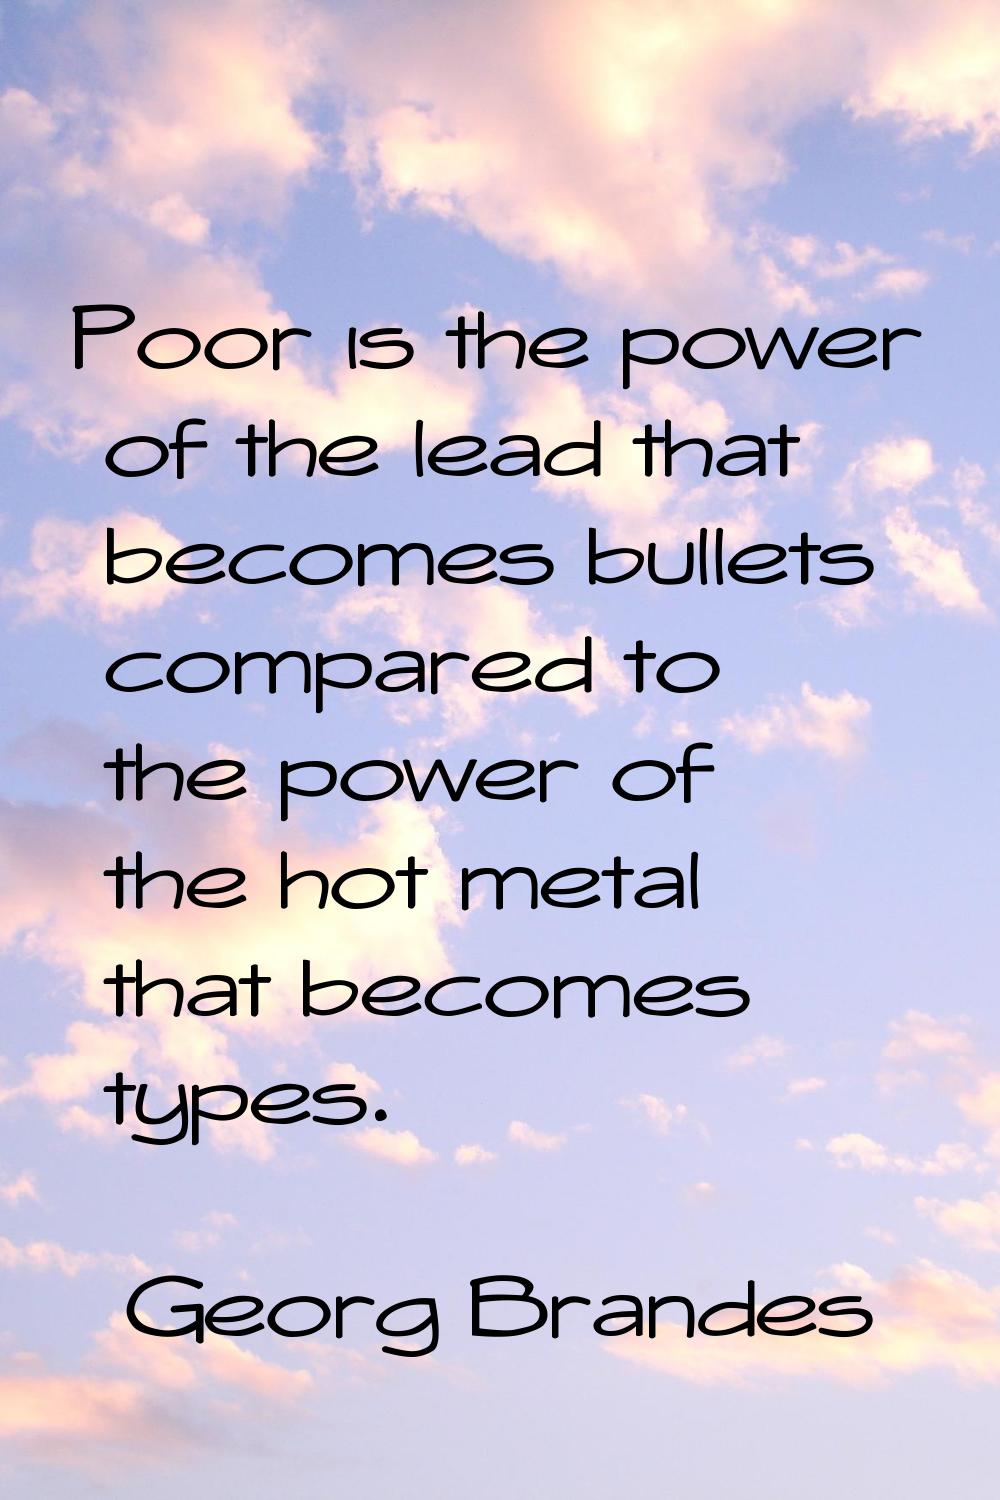 Poor is the power of the lead that becomes bullets compared to the power of the hot metal that beco